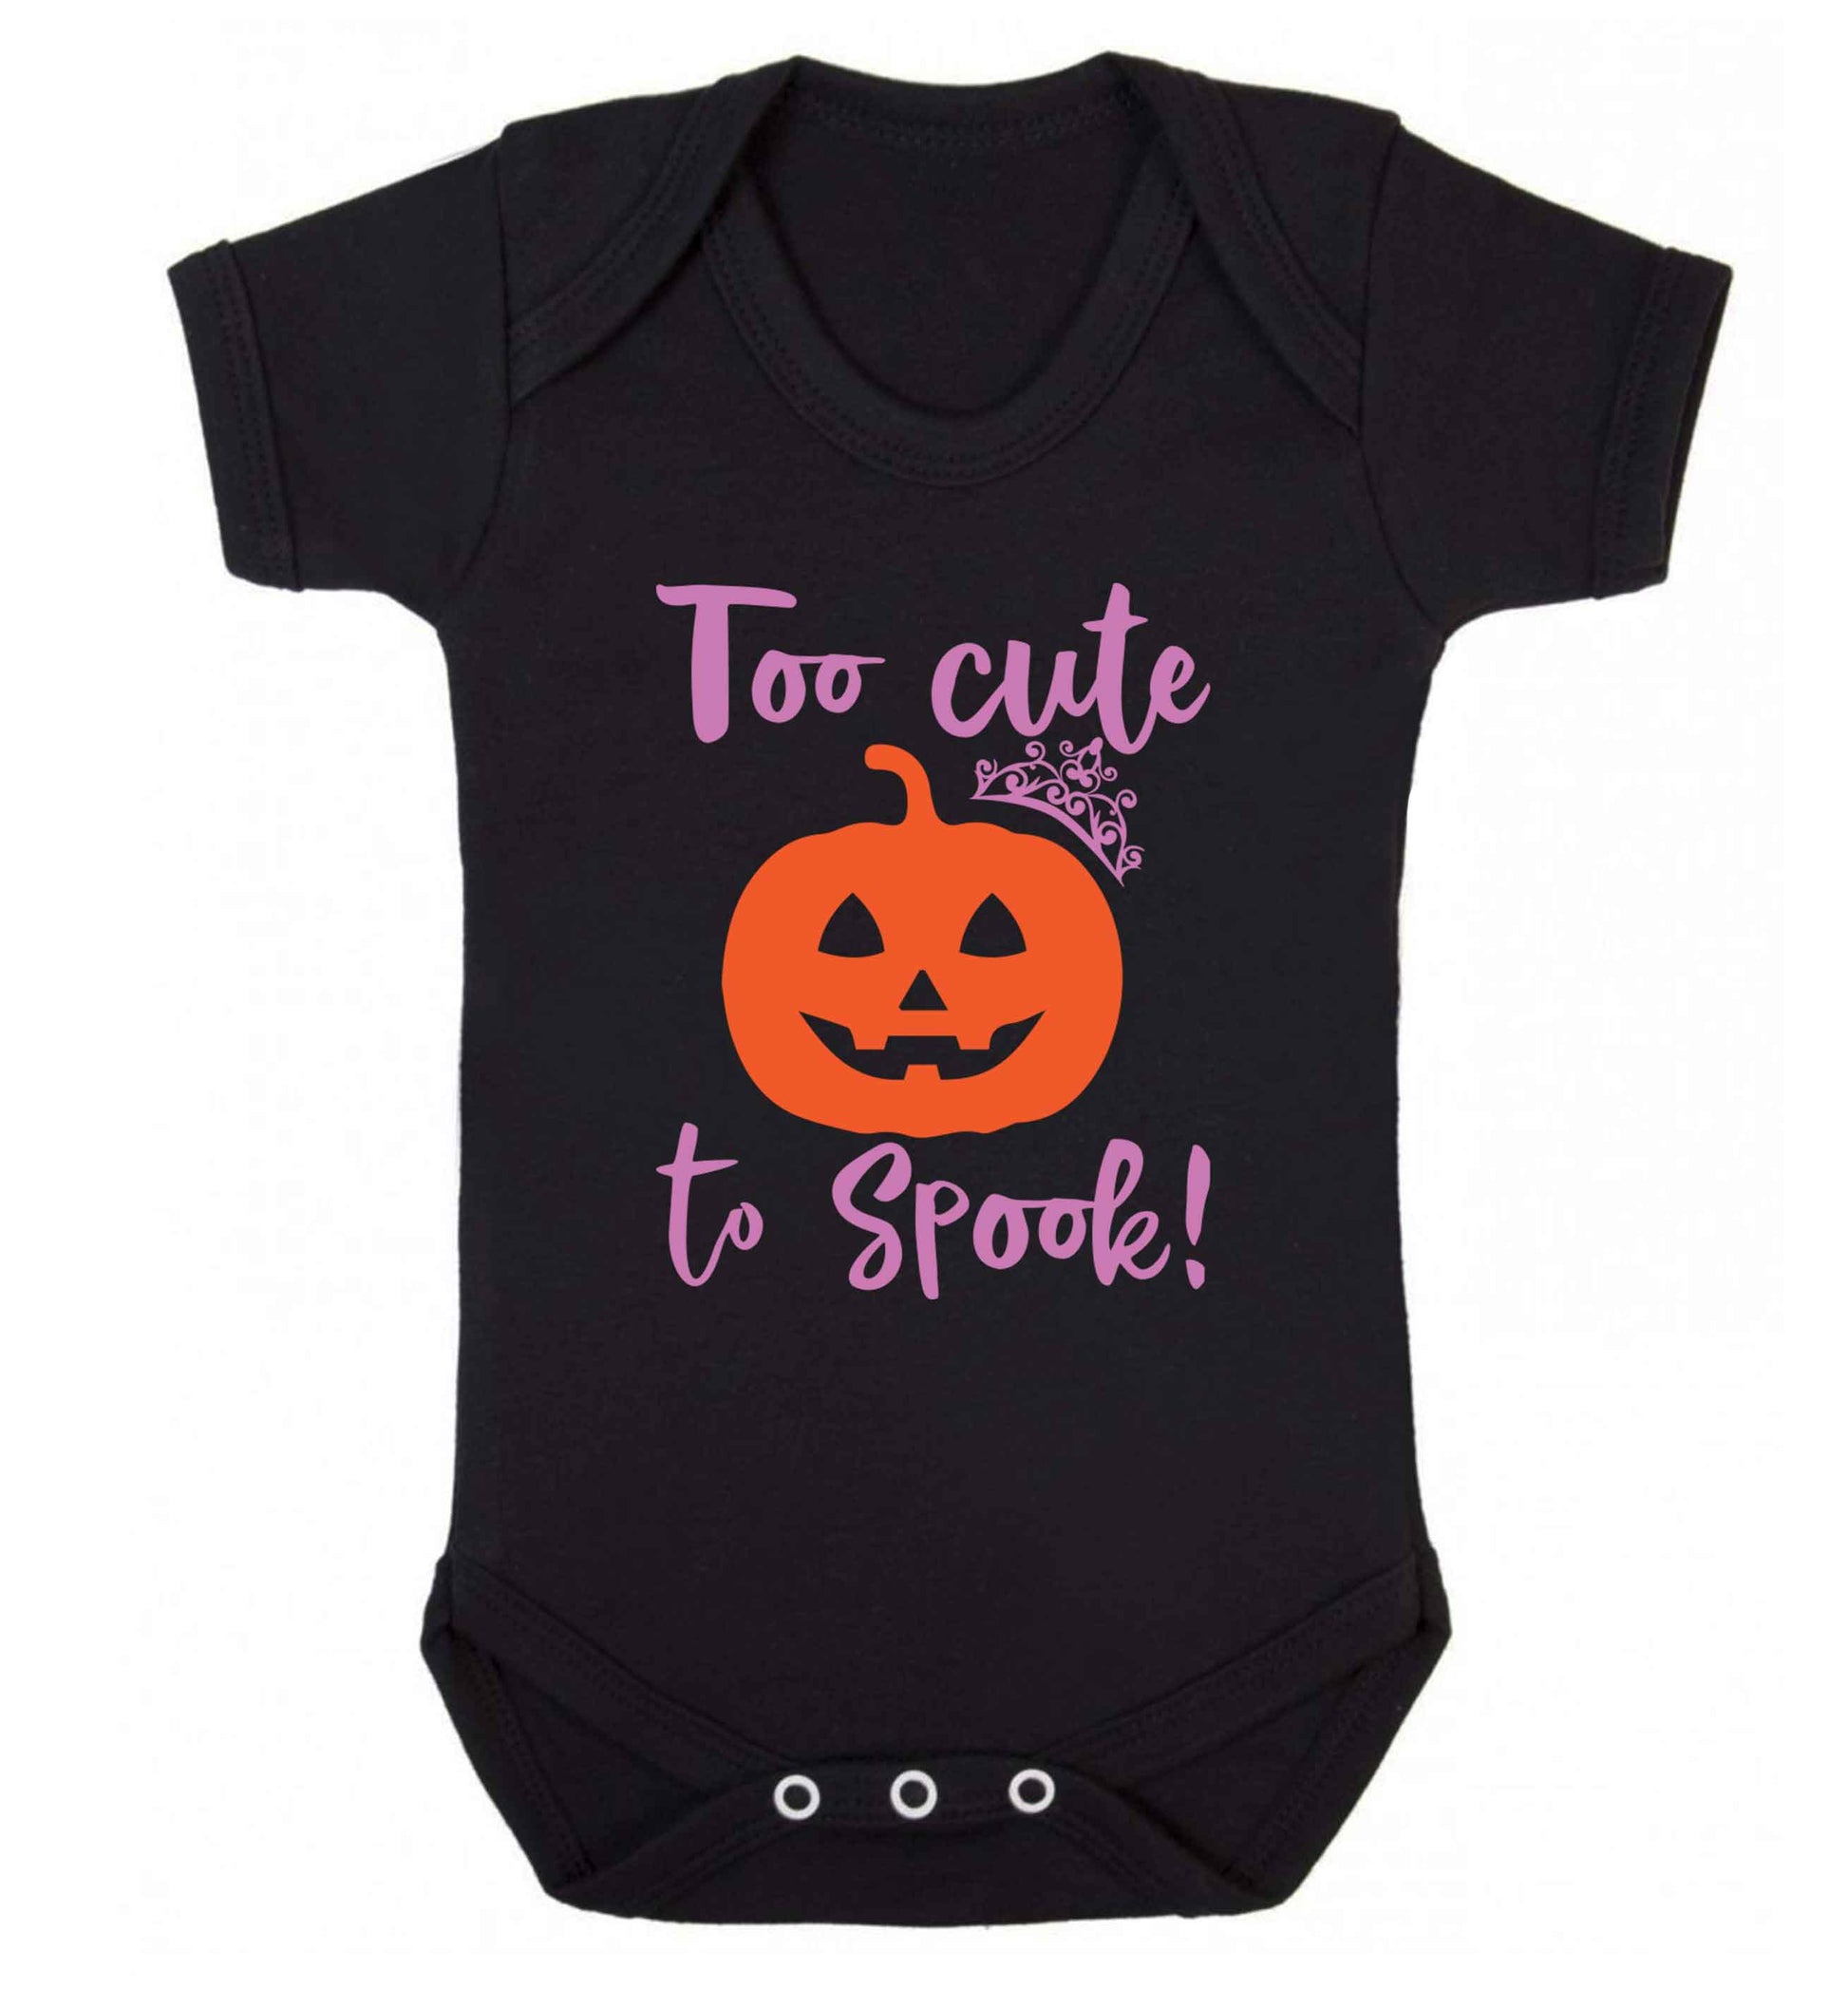 Too cute to spook! Baby Vest black 18-24 months